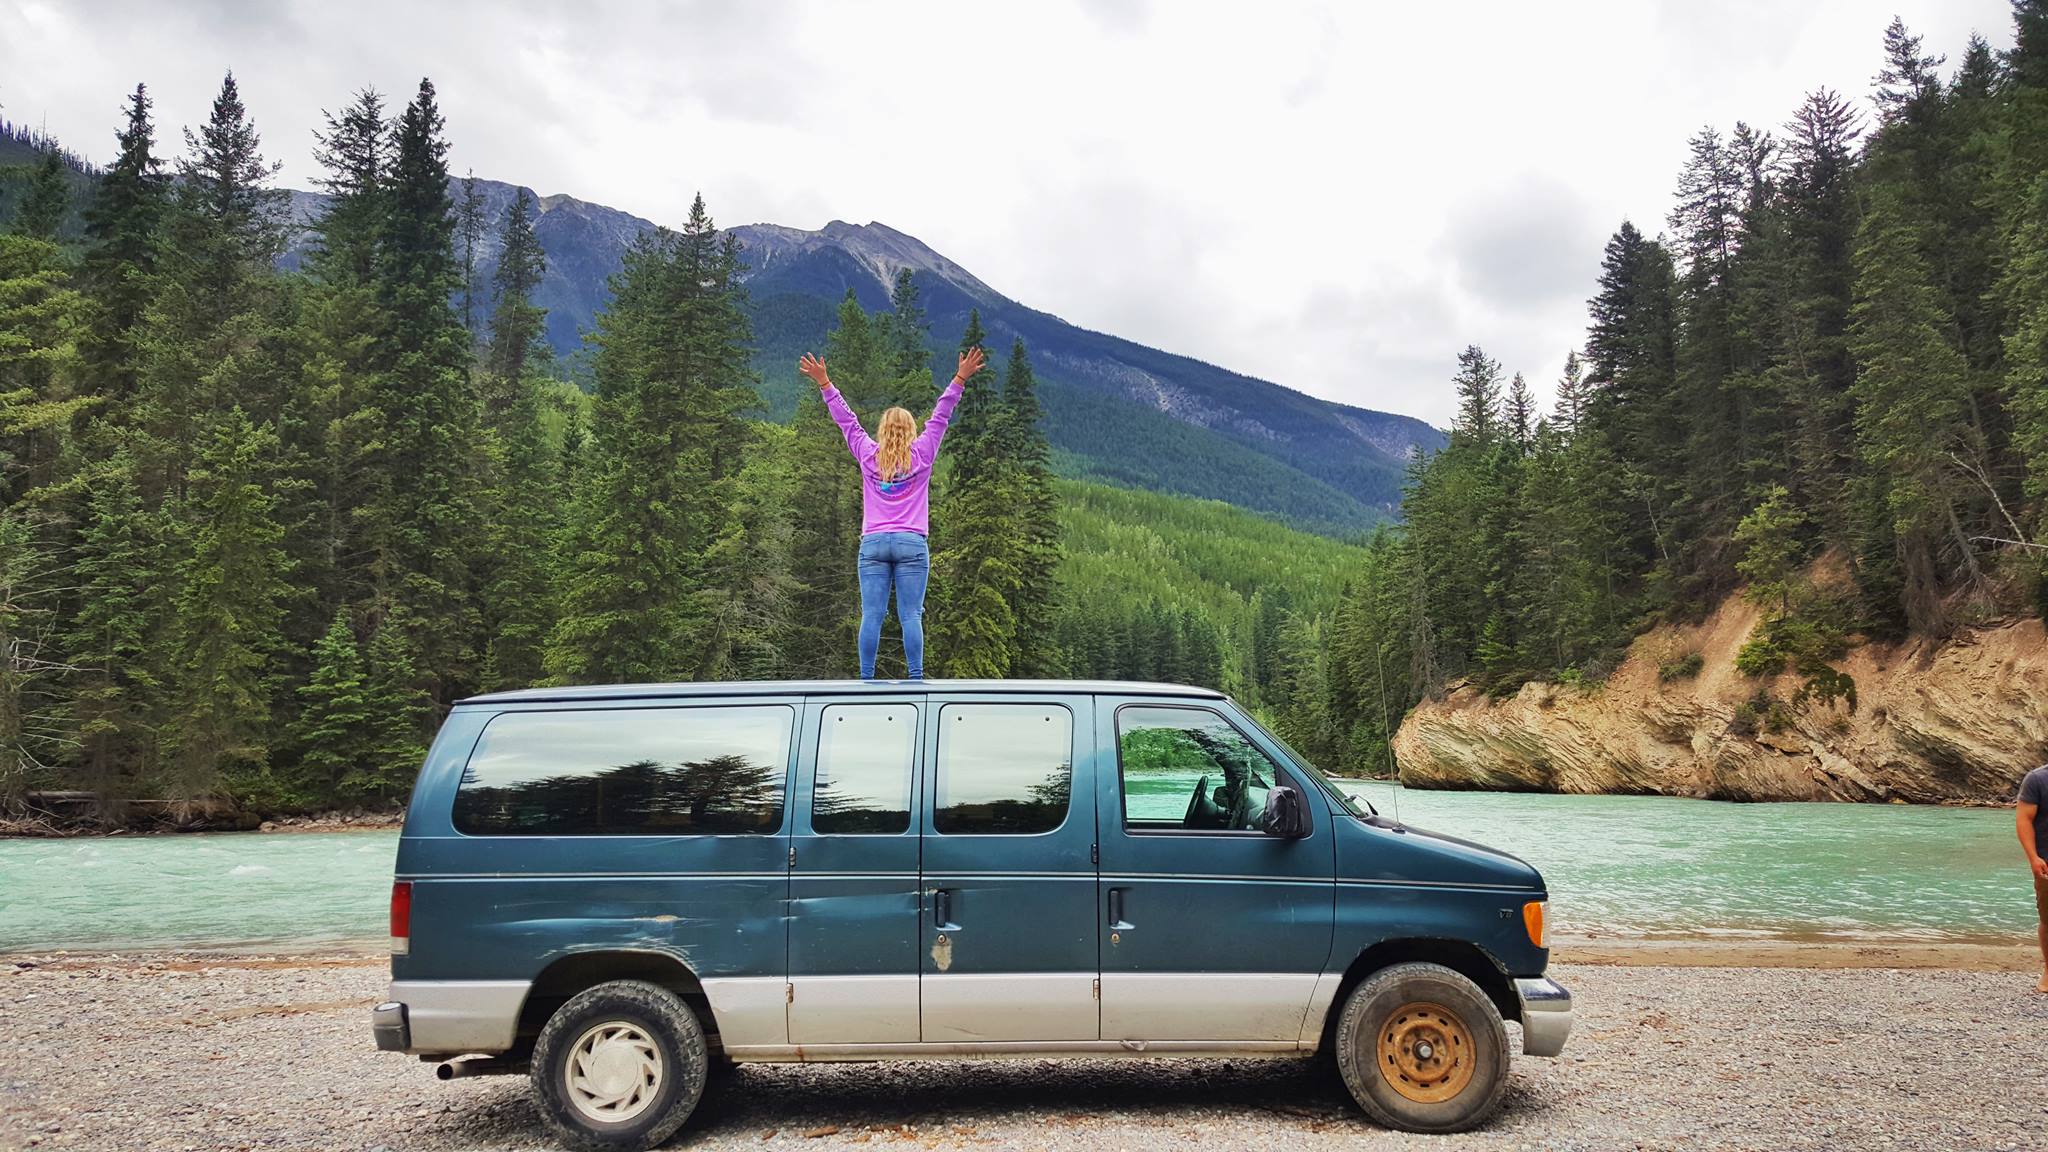 a woman stands on top of a van in a pretty nature setting